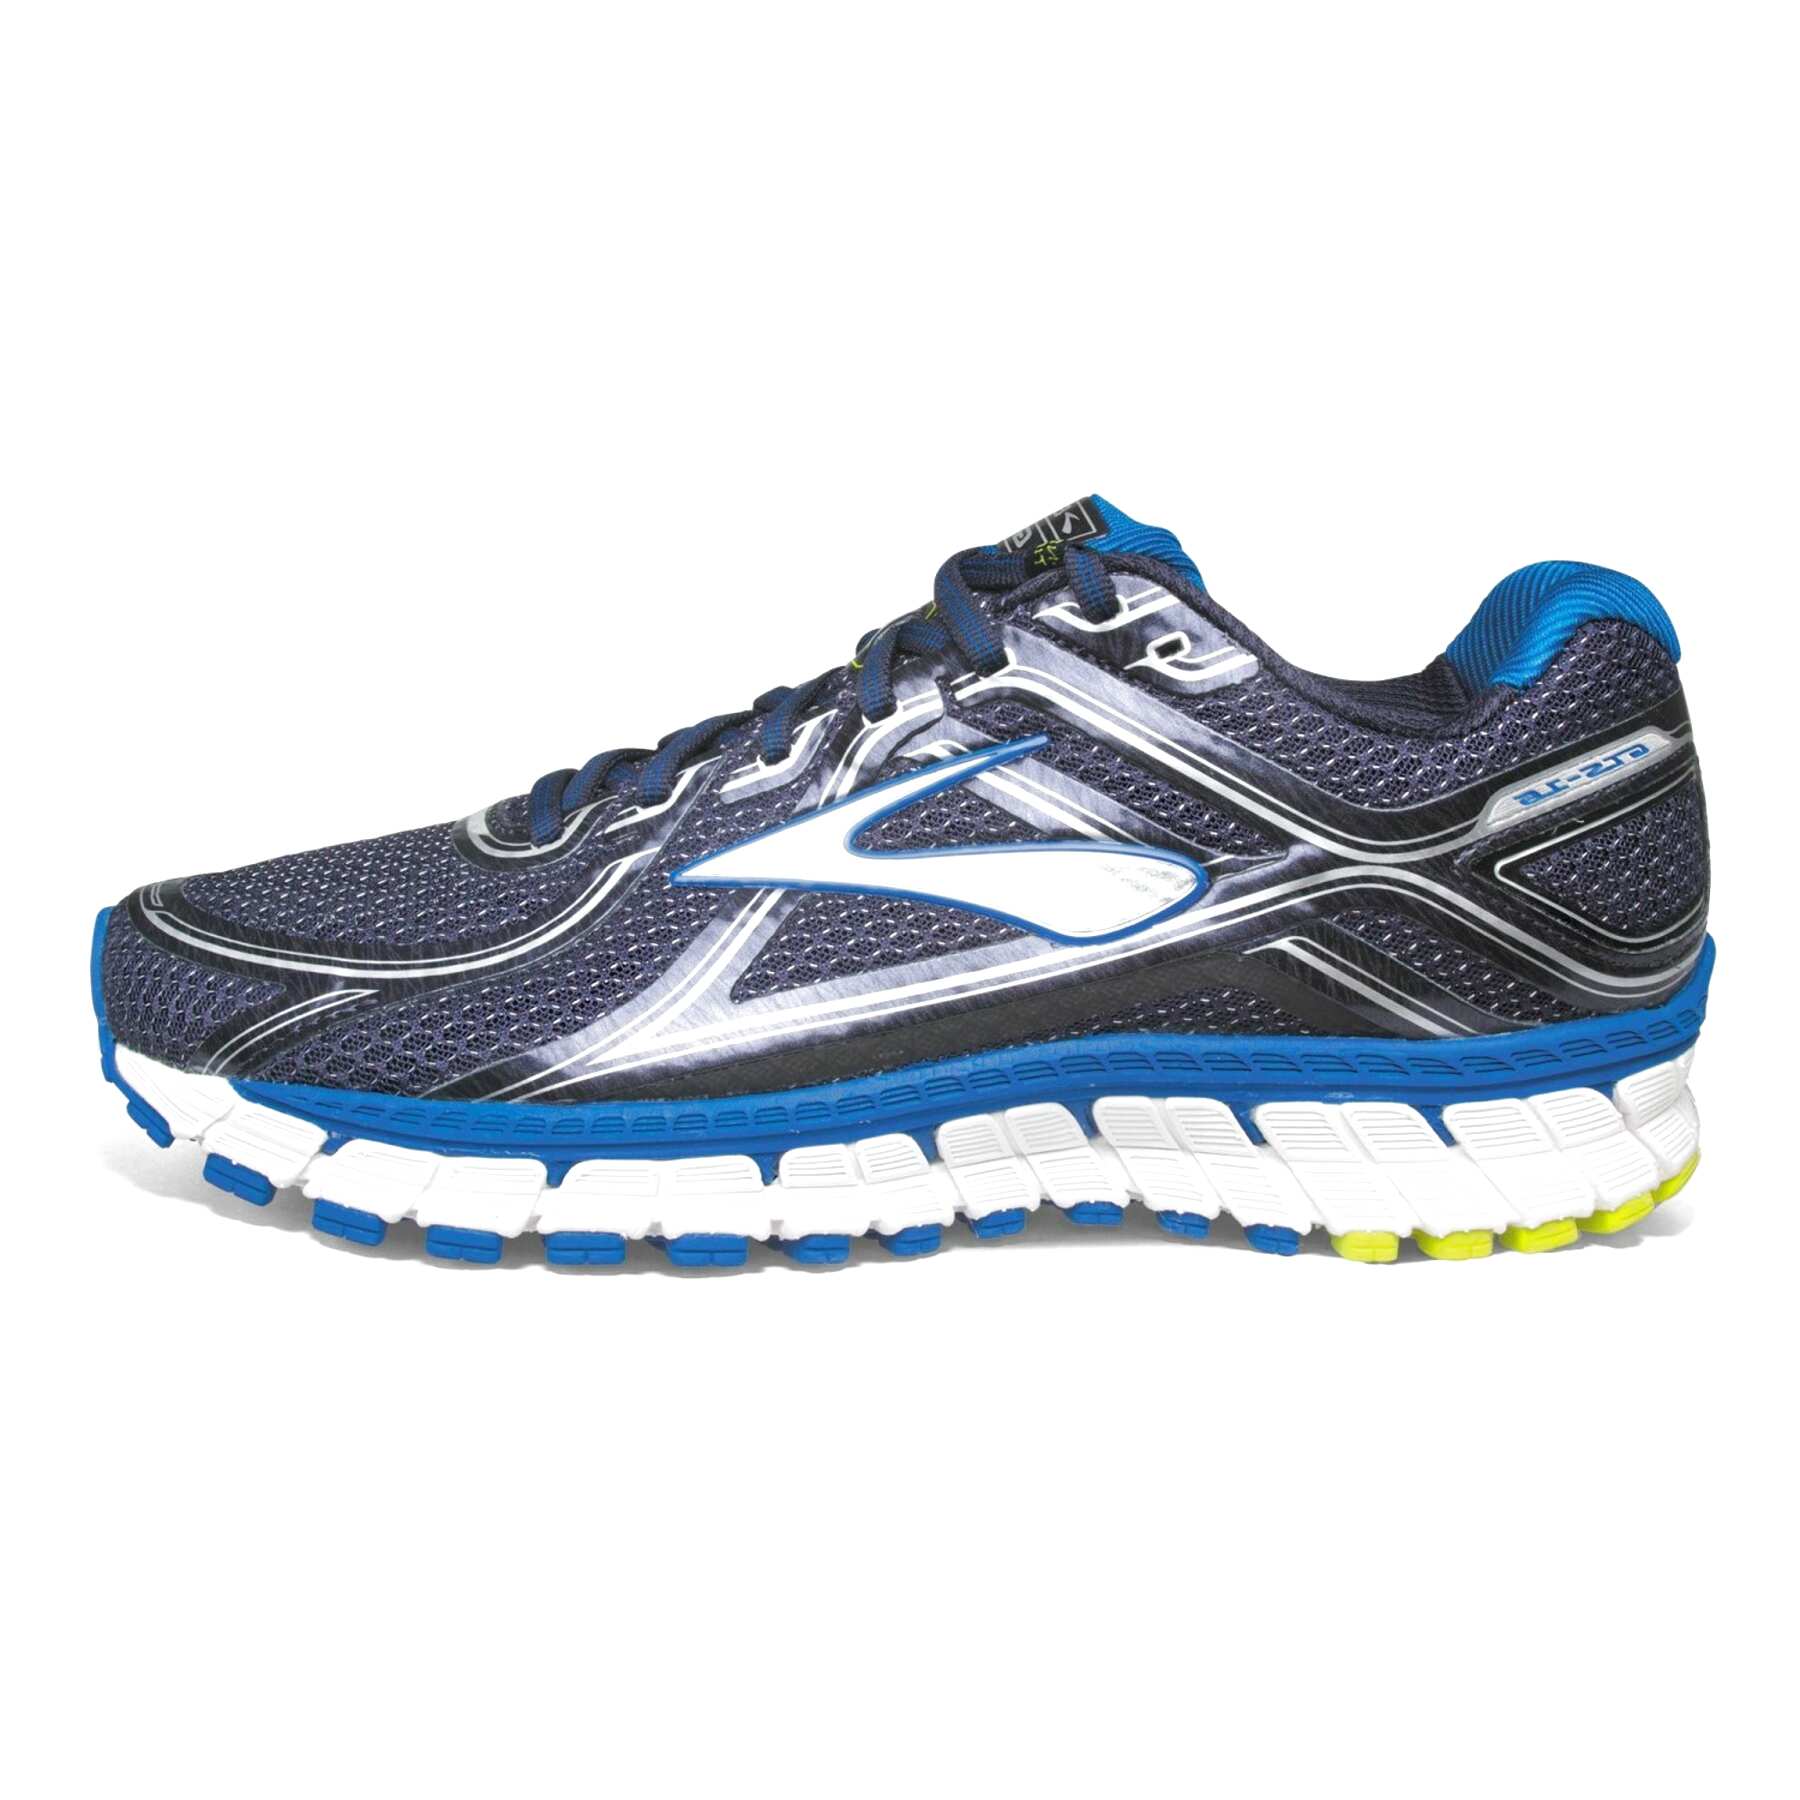 about brooks adreneline shoes